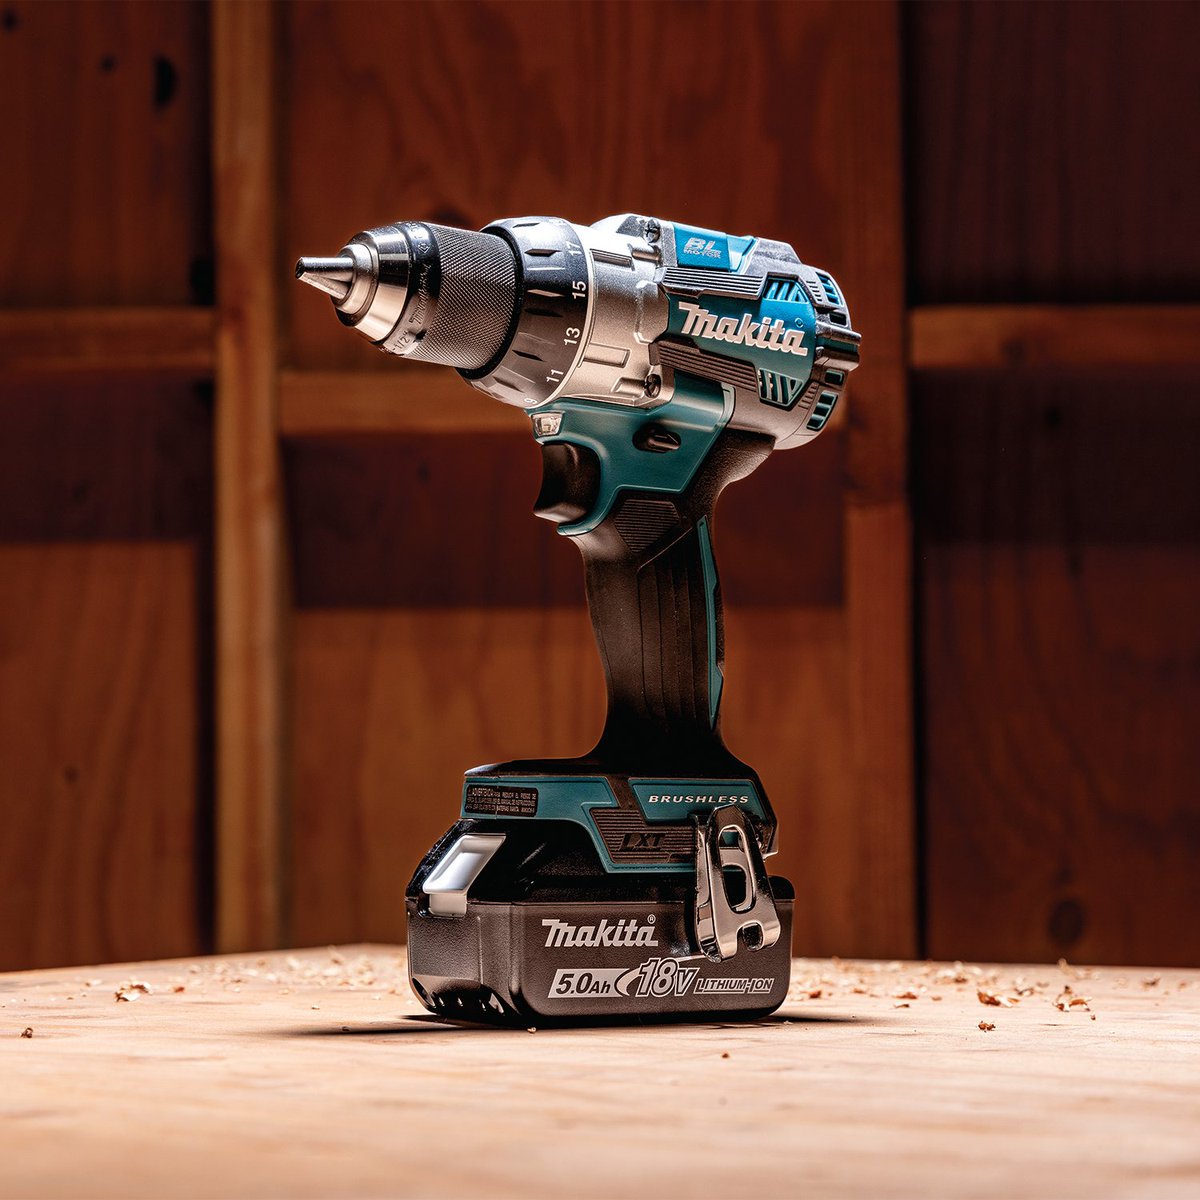 The 18V LXT® Brushless 1/2' Driver-Drill (XFD16) is a premium drilling and driving solution. It delivers 970 in.lbs. of Max Torque, has a 2-speed transmission (0-550 and 0-1,800 RPM) for a wide range of drilling and fastening applications. #makitausa #makitatools #makitakxt